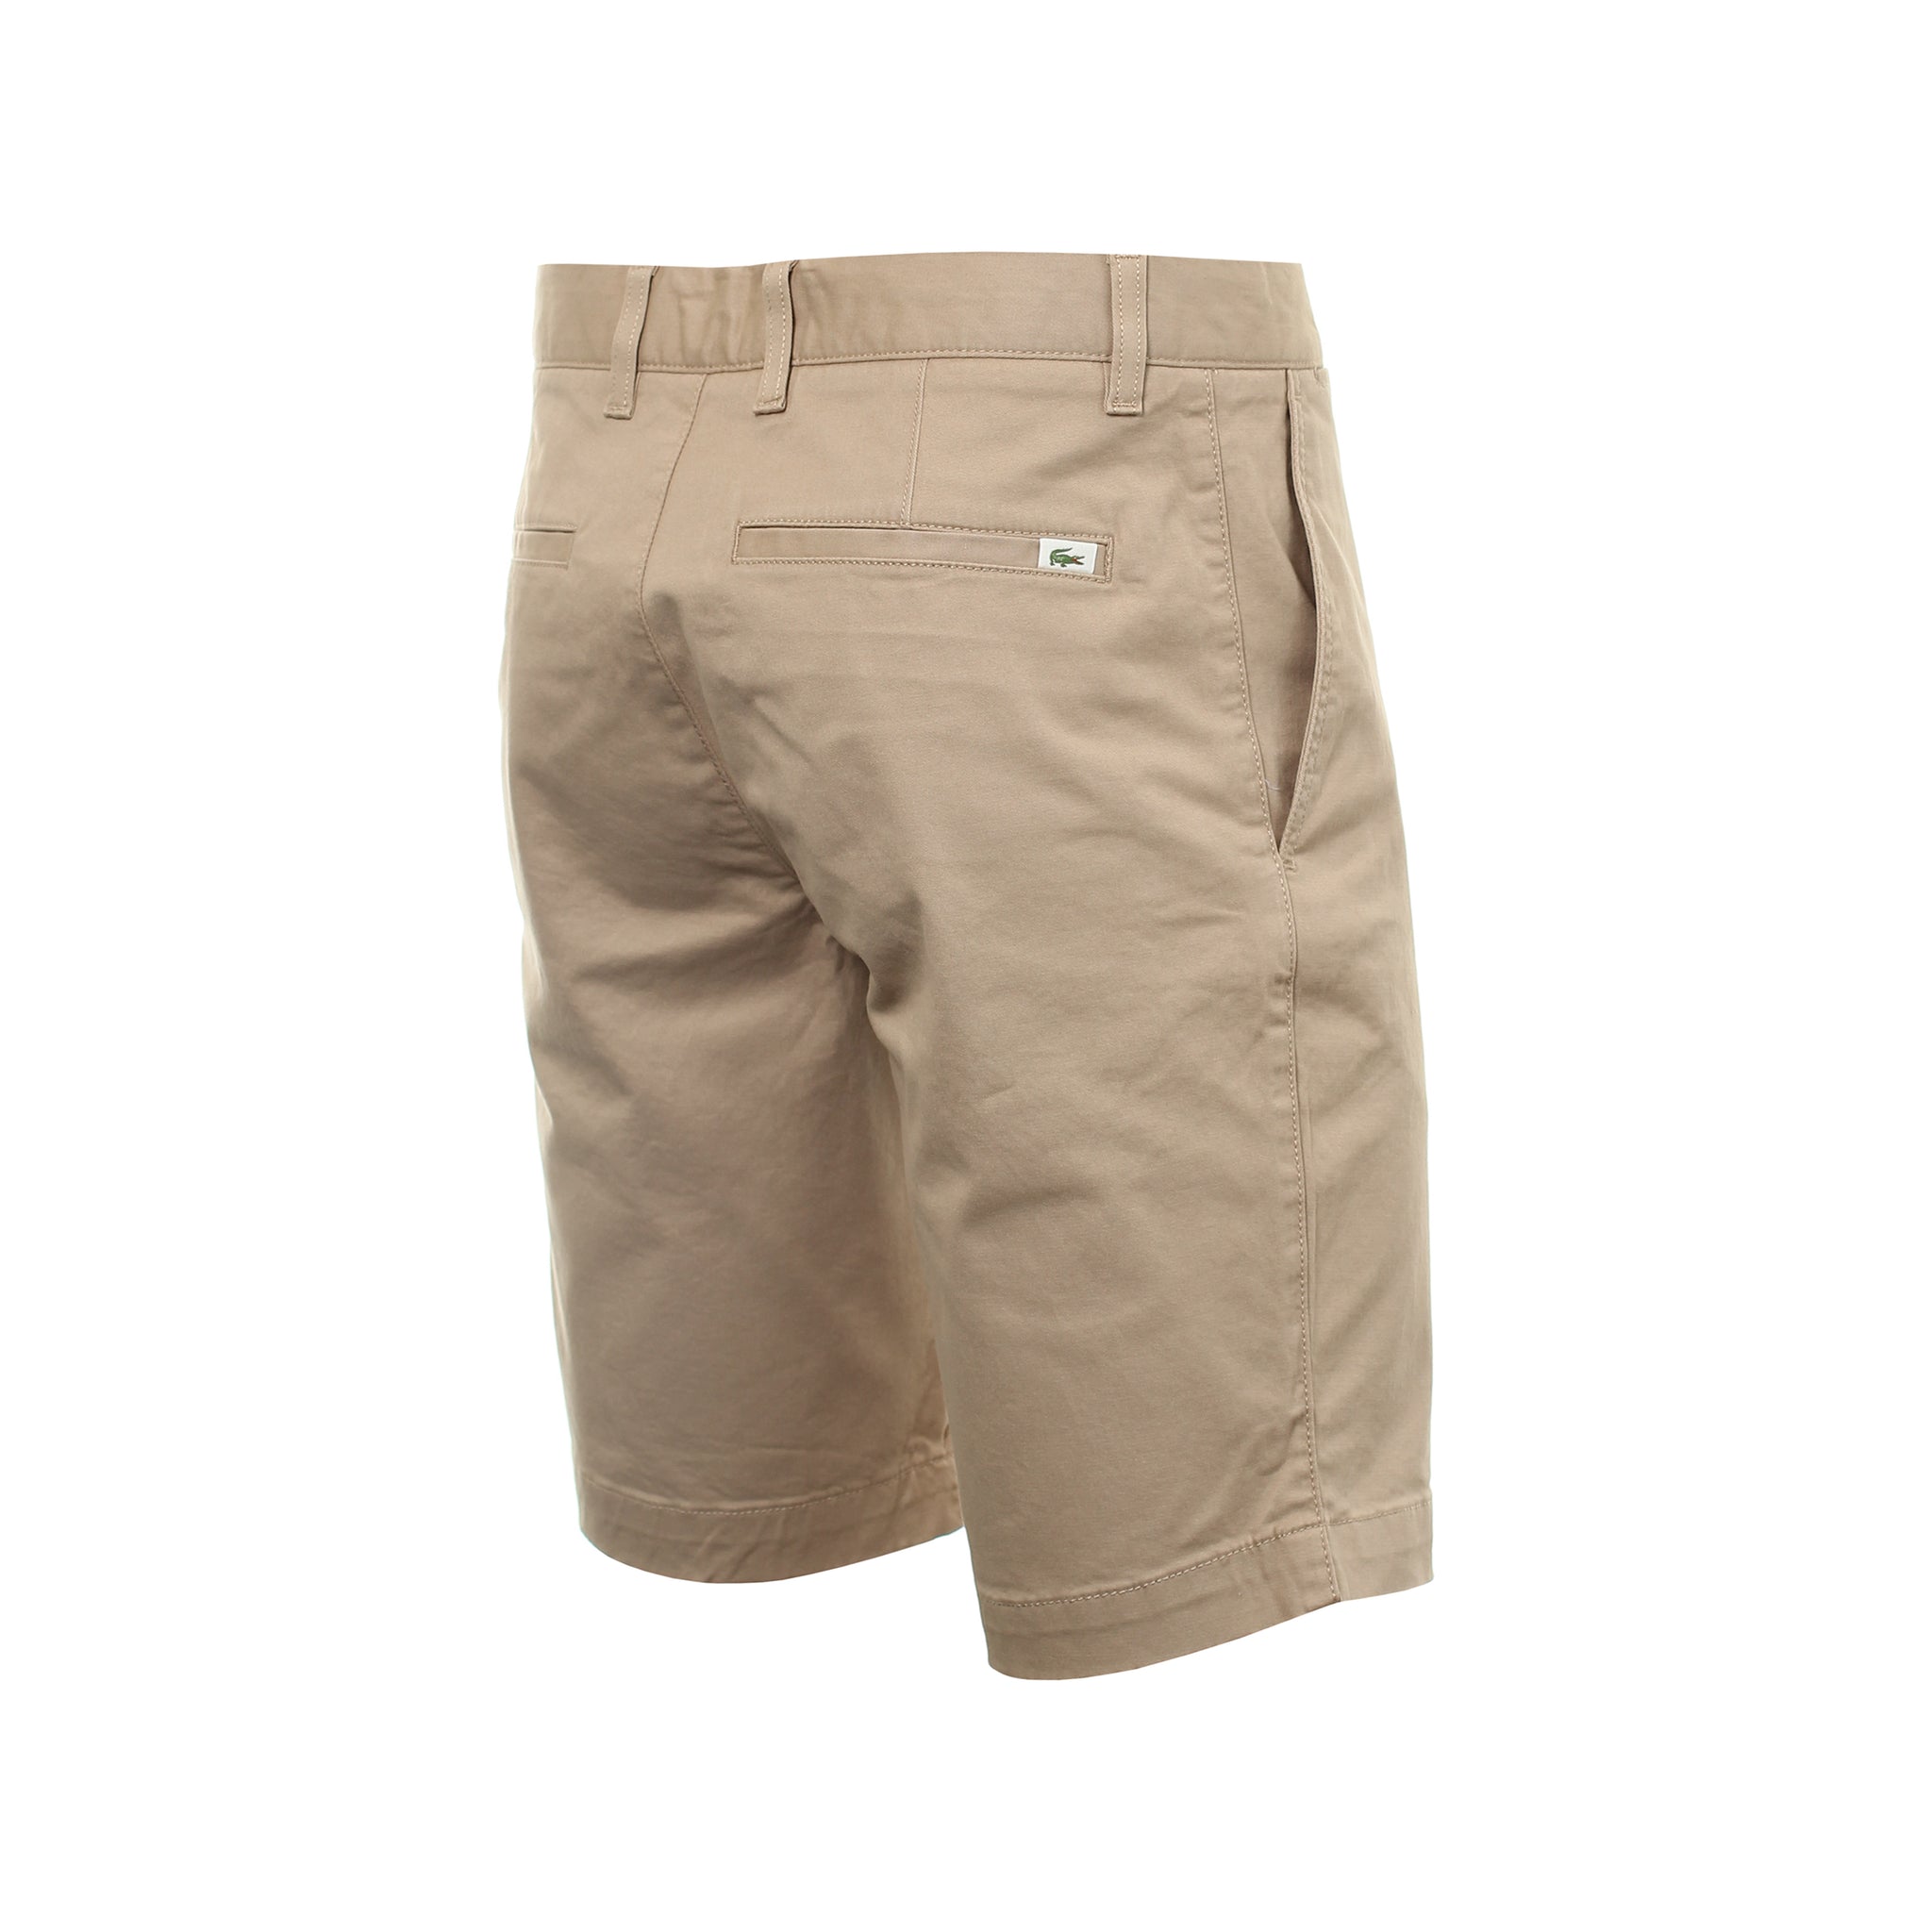 Lacoste Stretch Chino Short FH9542 Beige 02S | Function18